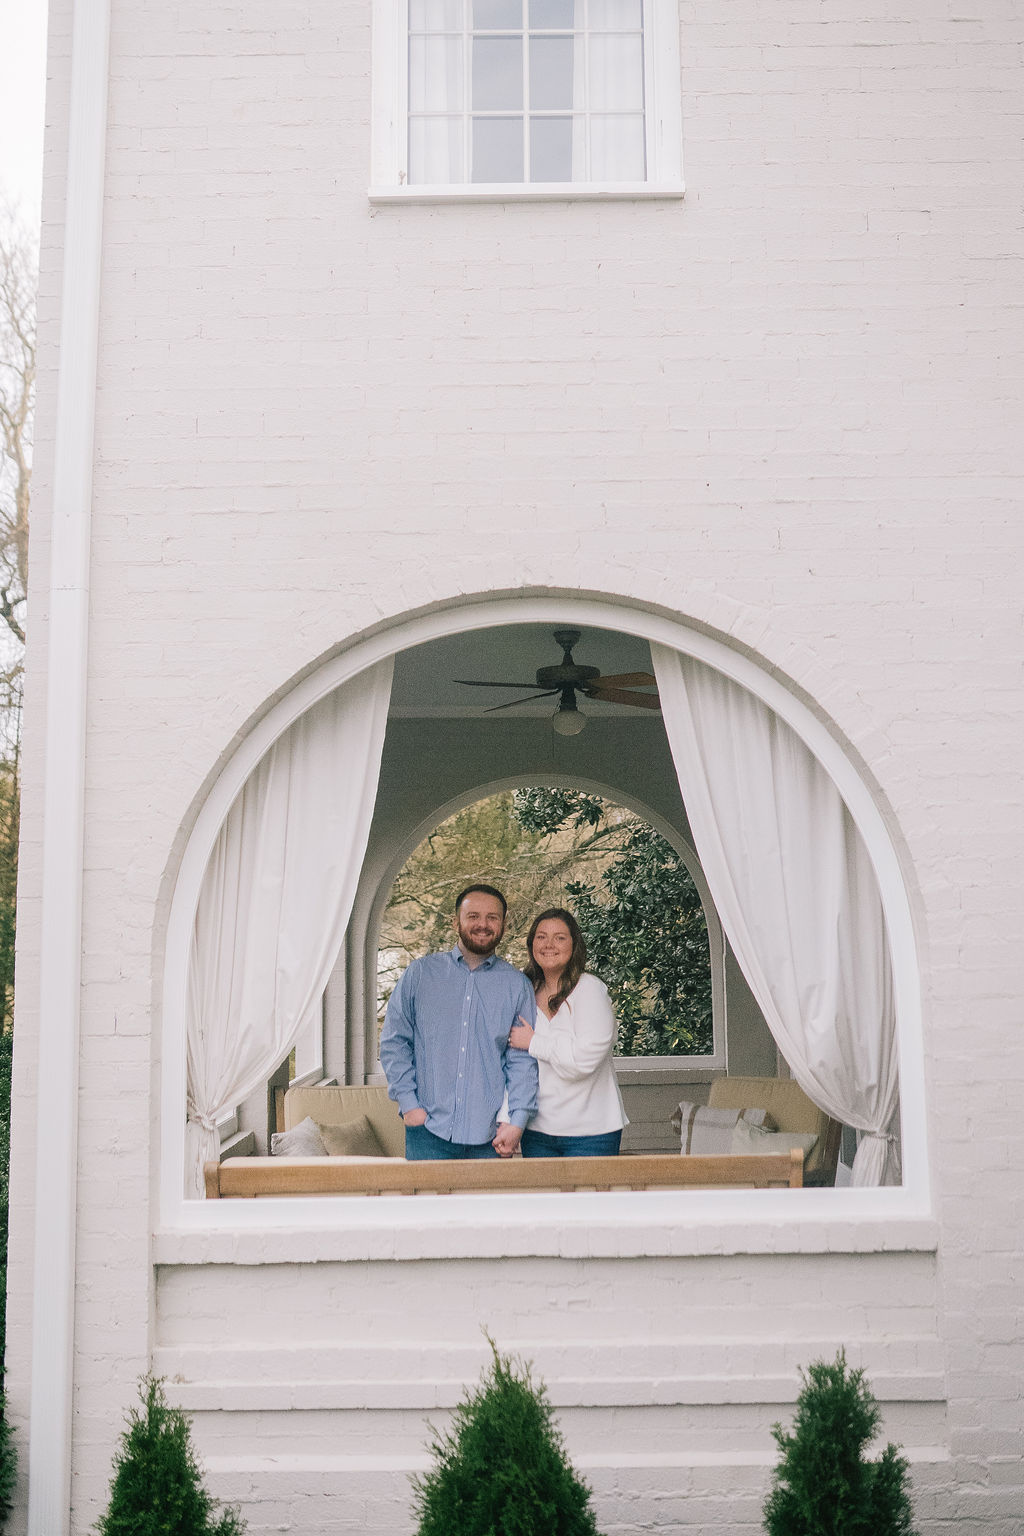 arched window with engaged couple standing inside